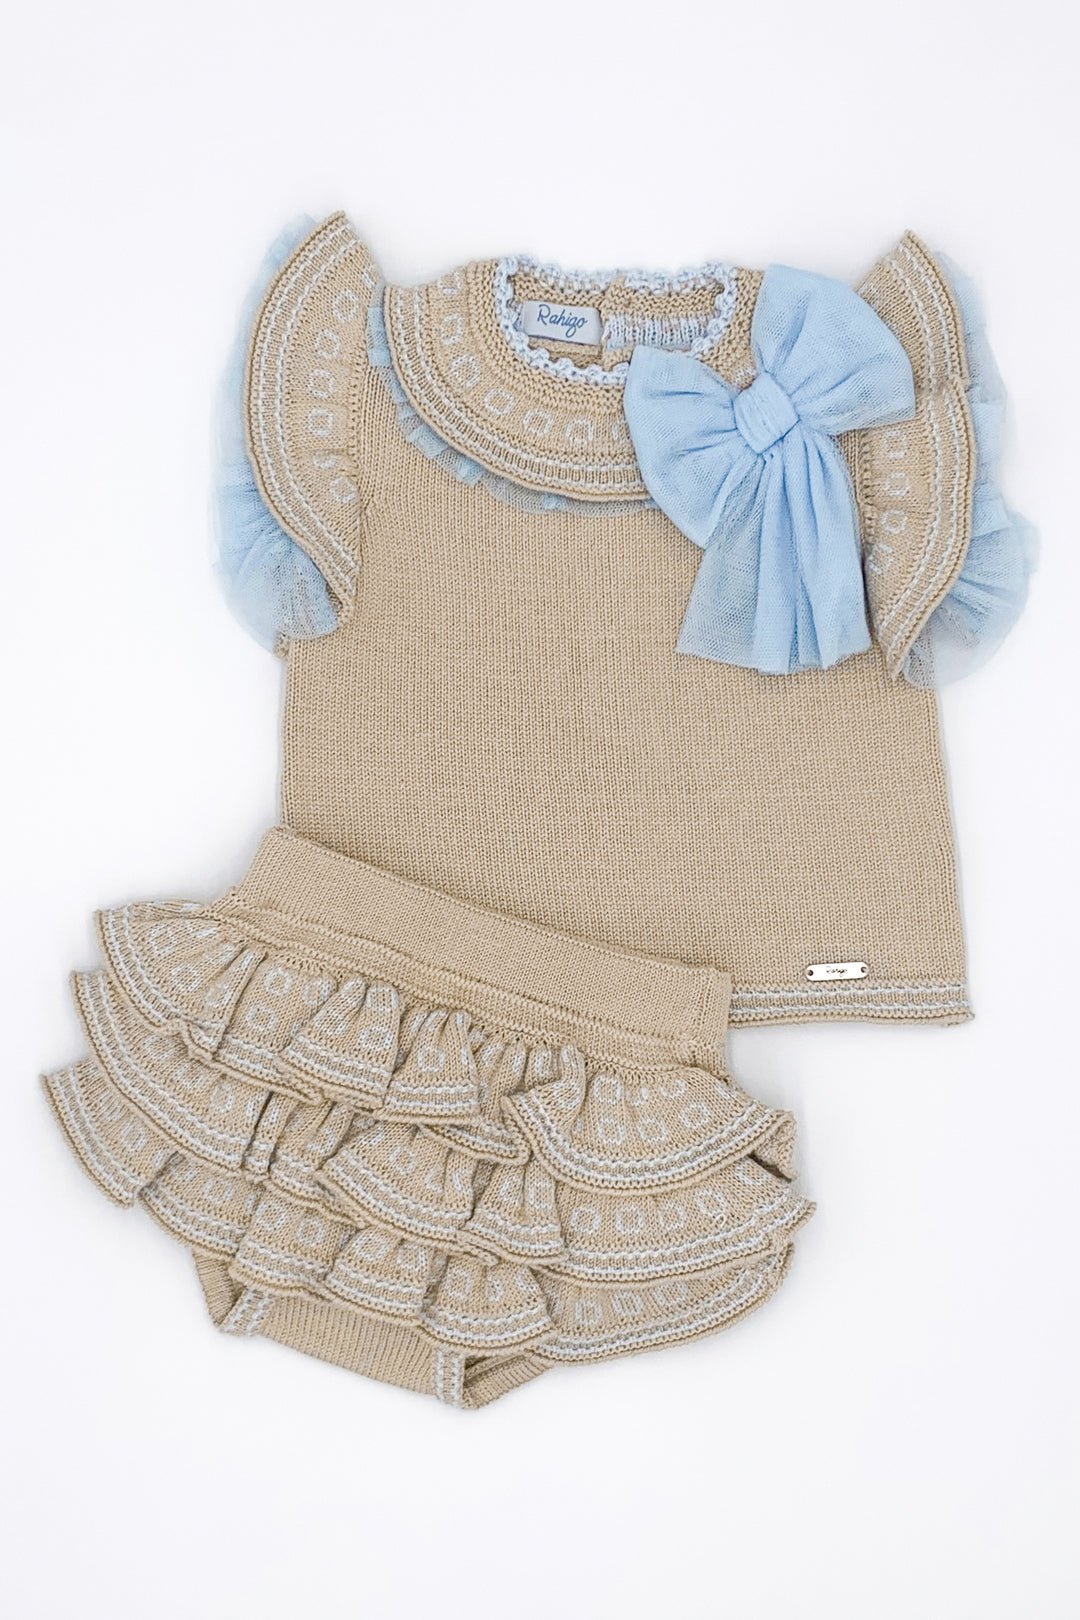 Rahigo PREORDER "Gracie" Camel & Baby Blue Knit Top & Bloomers | Millie and John